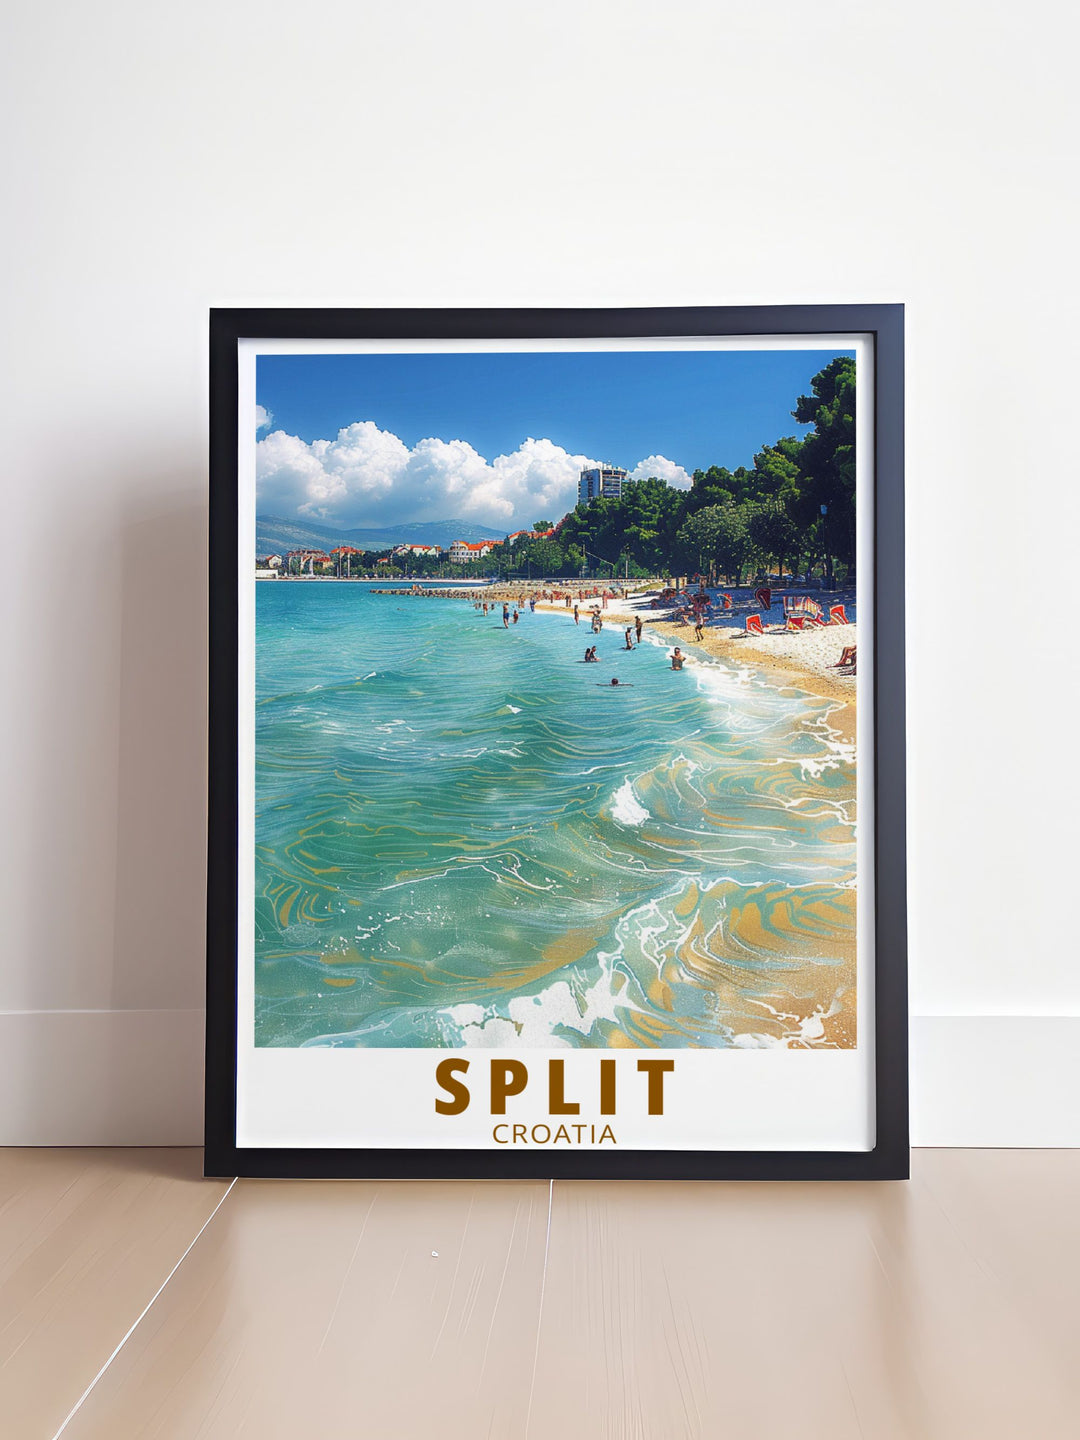 This vintage inspired poster of Split captures the essence of its rich cultural heritage and stunning coastal landmarks, offering a glimpse into one of Europes most enchanting destinations.